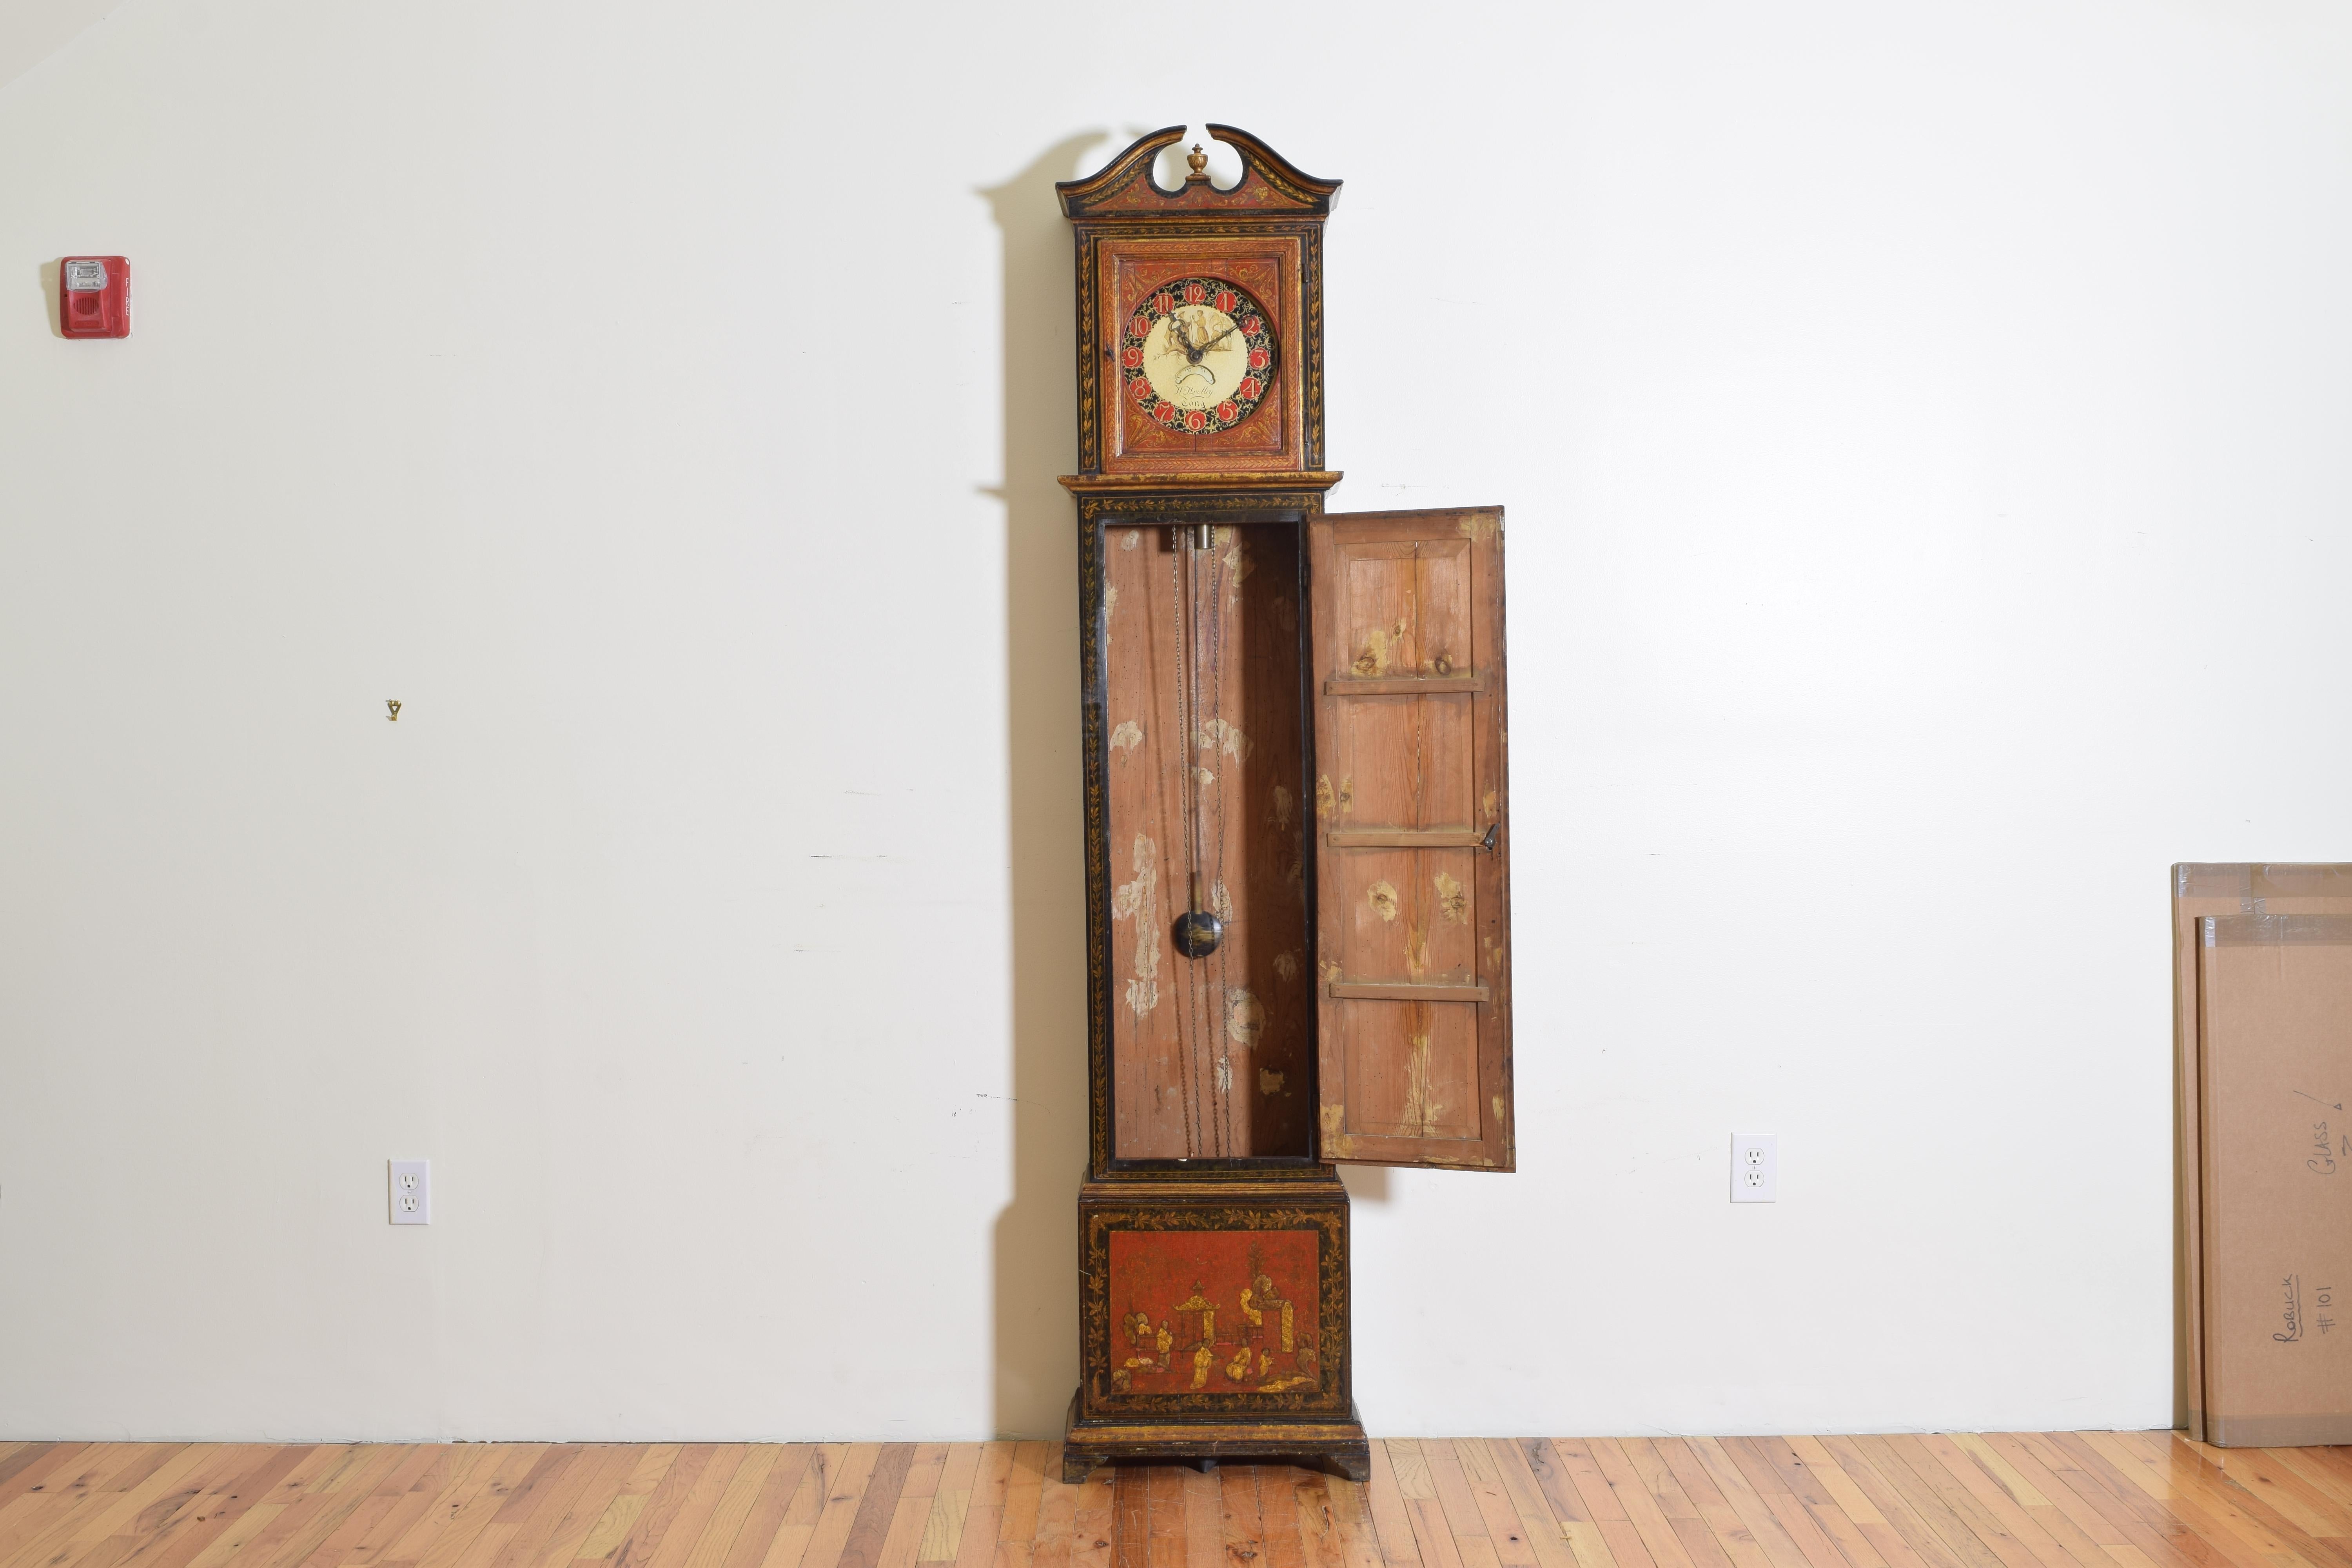 European Continental Chinoiserie Paint Decorated Case Clock, Late 18th-Early 19th Century